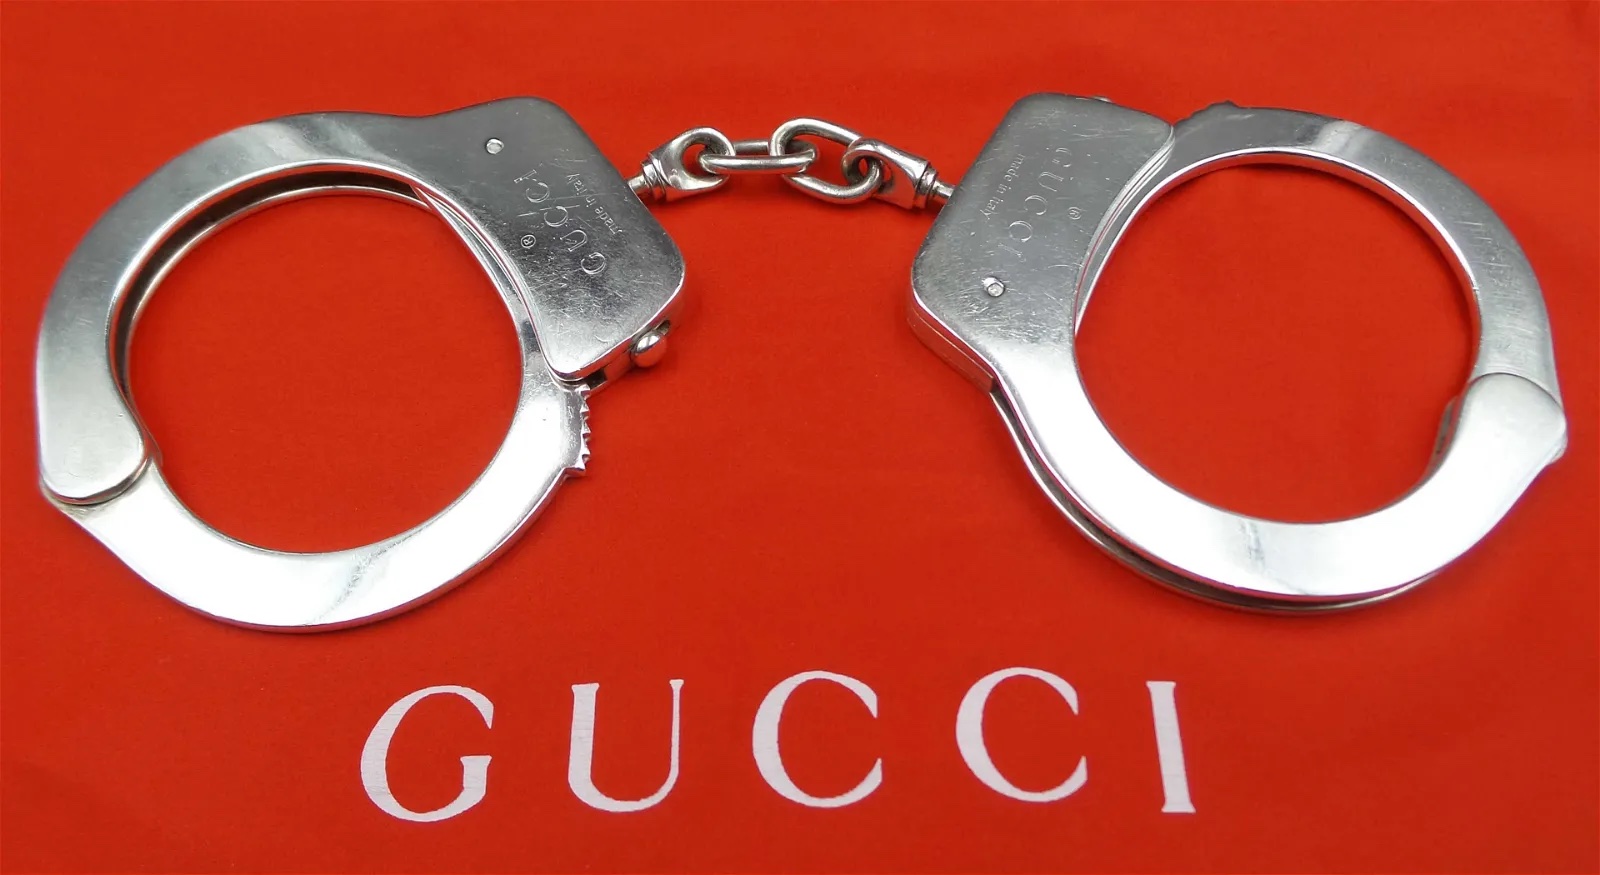 Gucci sterling silver handcuffs, designed by Tom Ford and estimated at $25,000-$50,000 at Pandora Auctions.